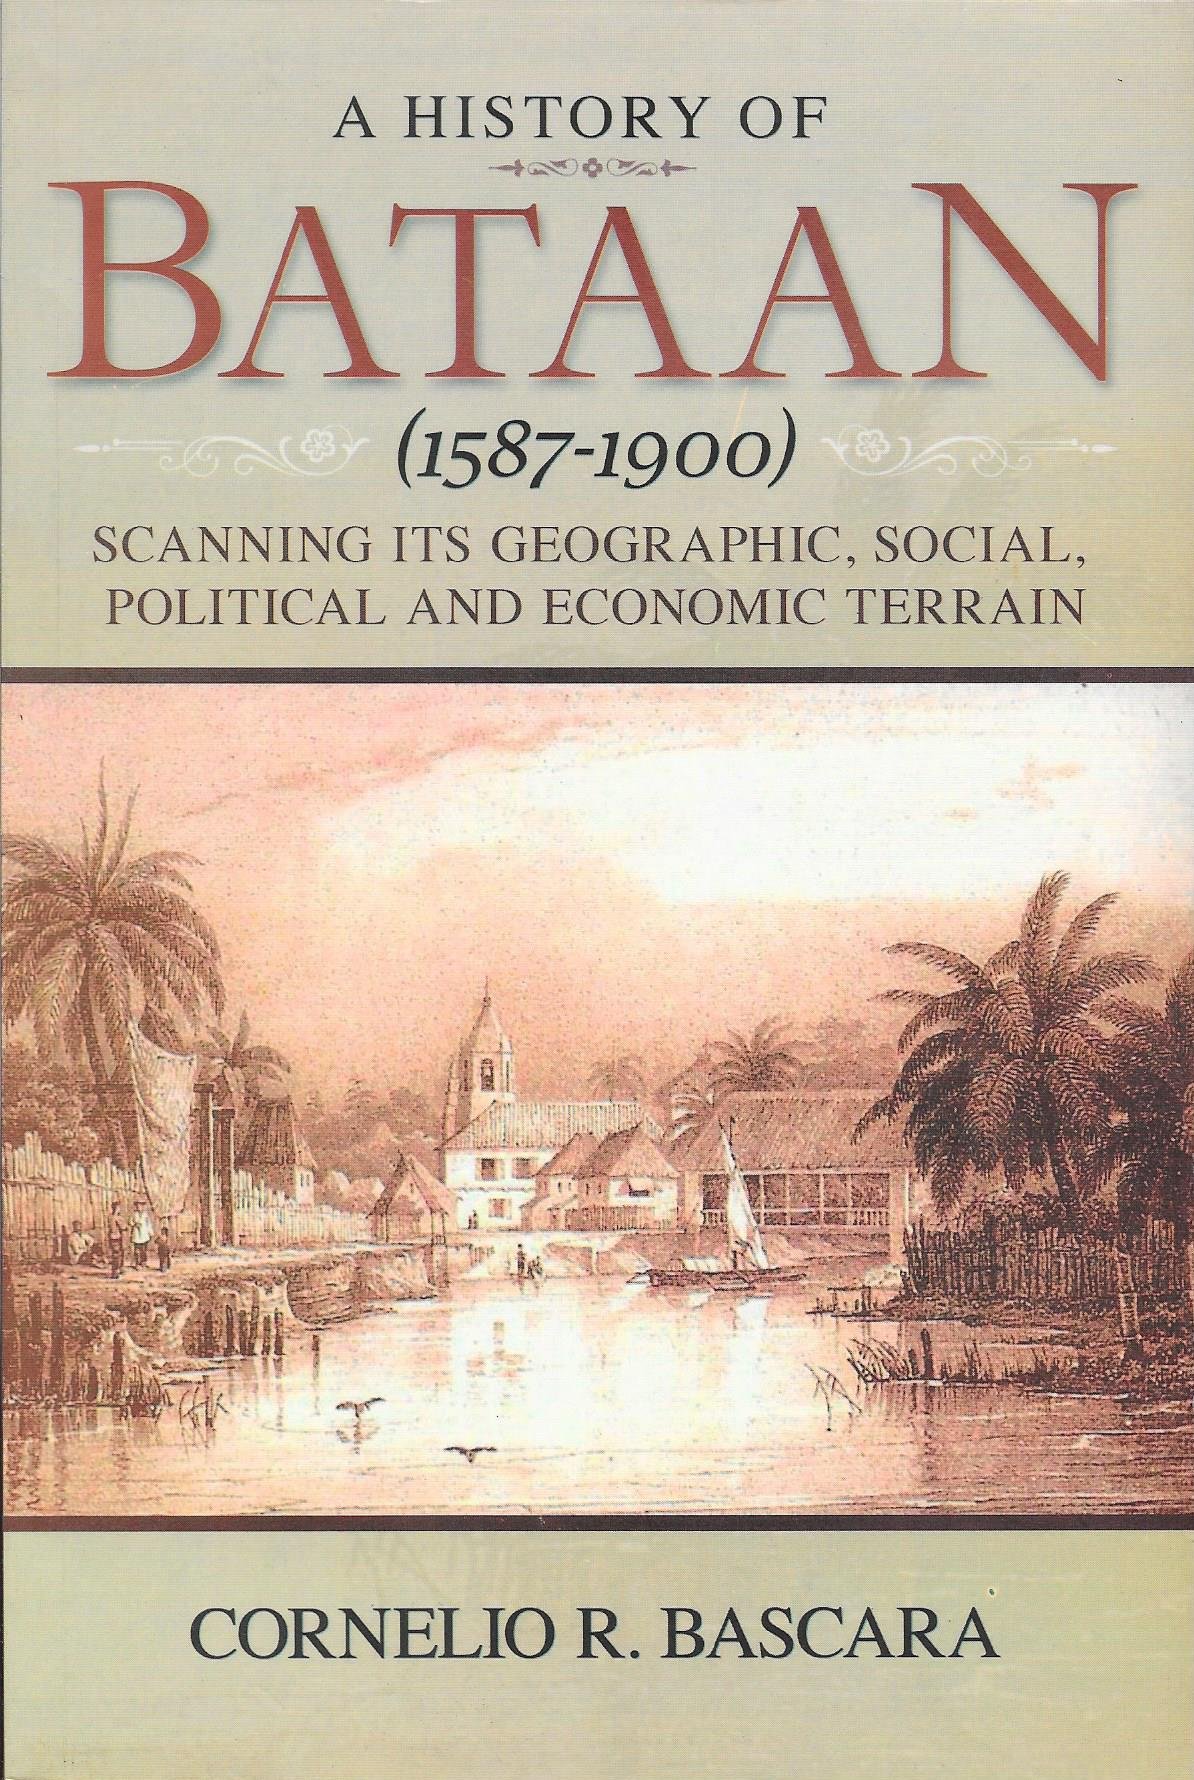 A History of Bataan, 1587-1900: Scanning Its Geographic, Social, Political and Economic Terrain